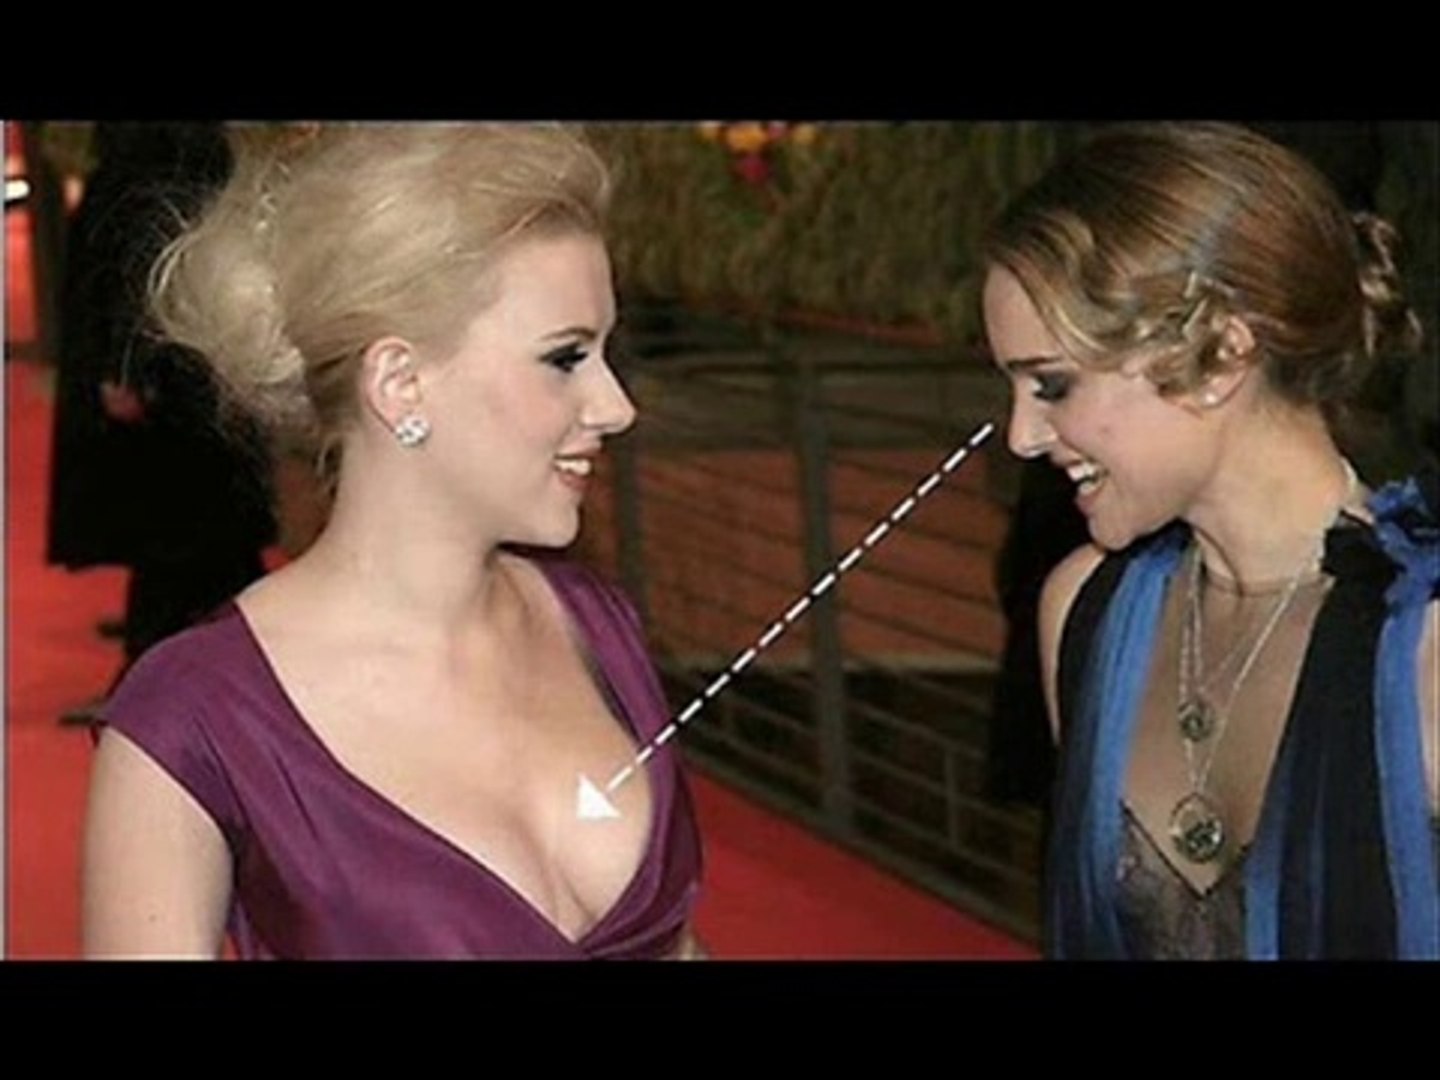 Oops!-Busted-Staring-at-Boobs!-[-Celebrities-Caught-Staring-]-OMG-funny-video  - video Dailymotion